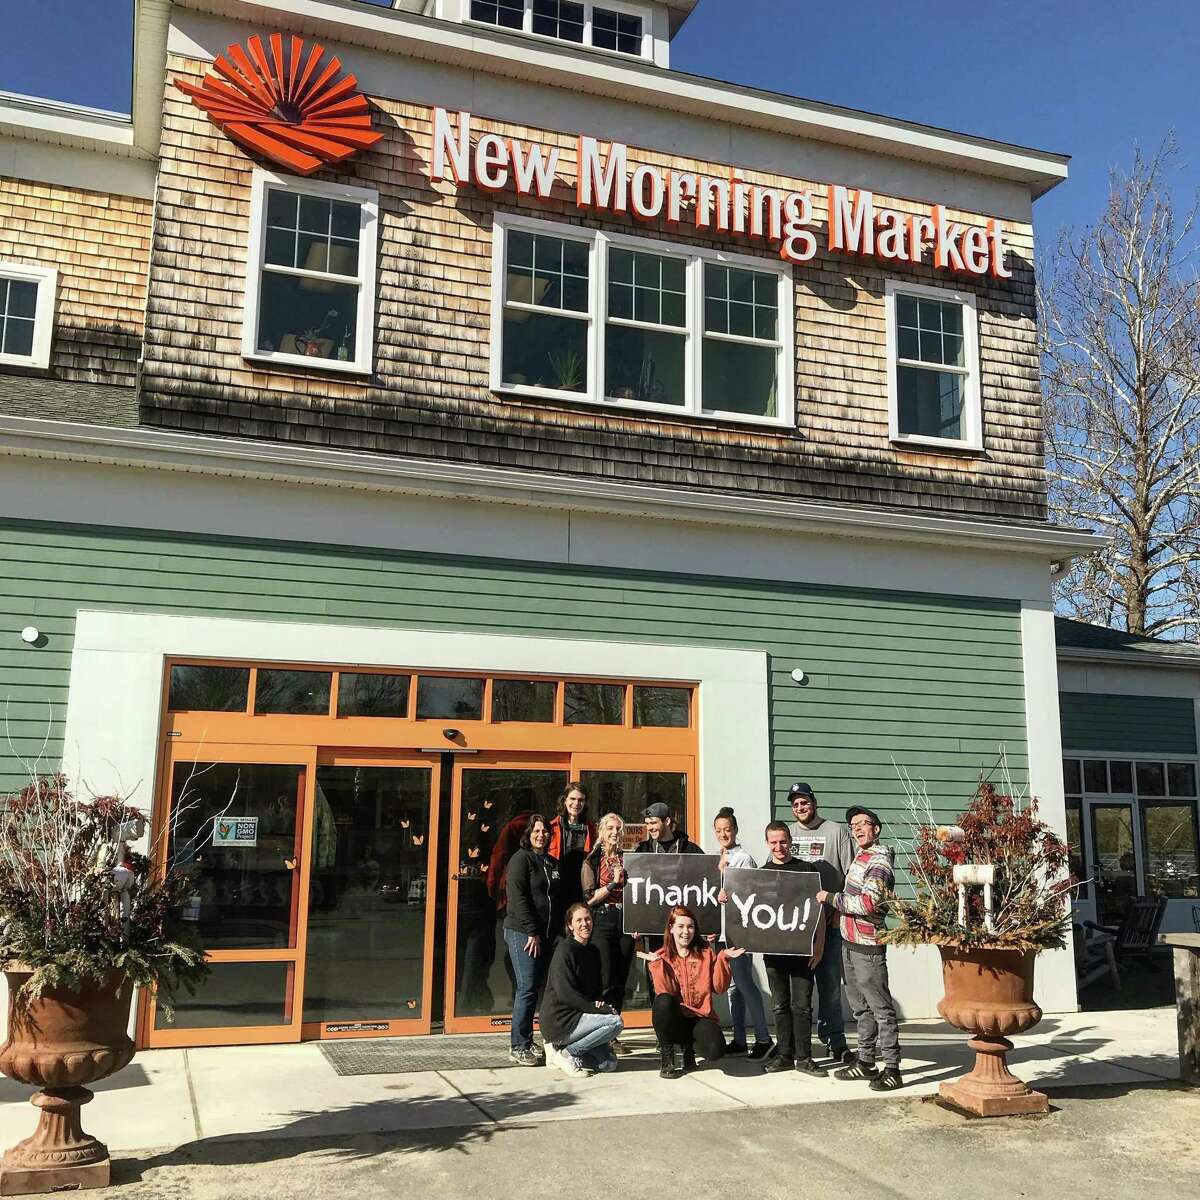 New Morning Market in Woodbury is celebrating its anniversary with customer appreciation events in May.